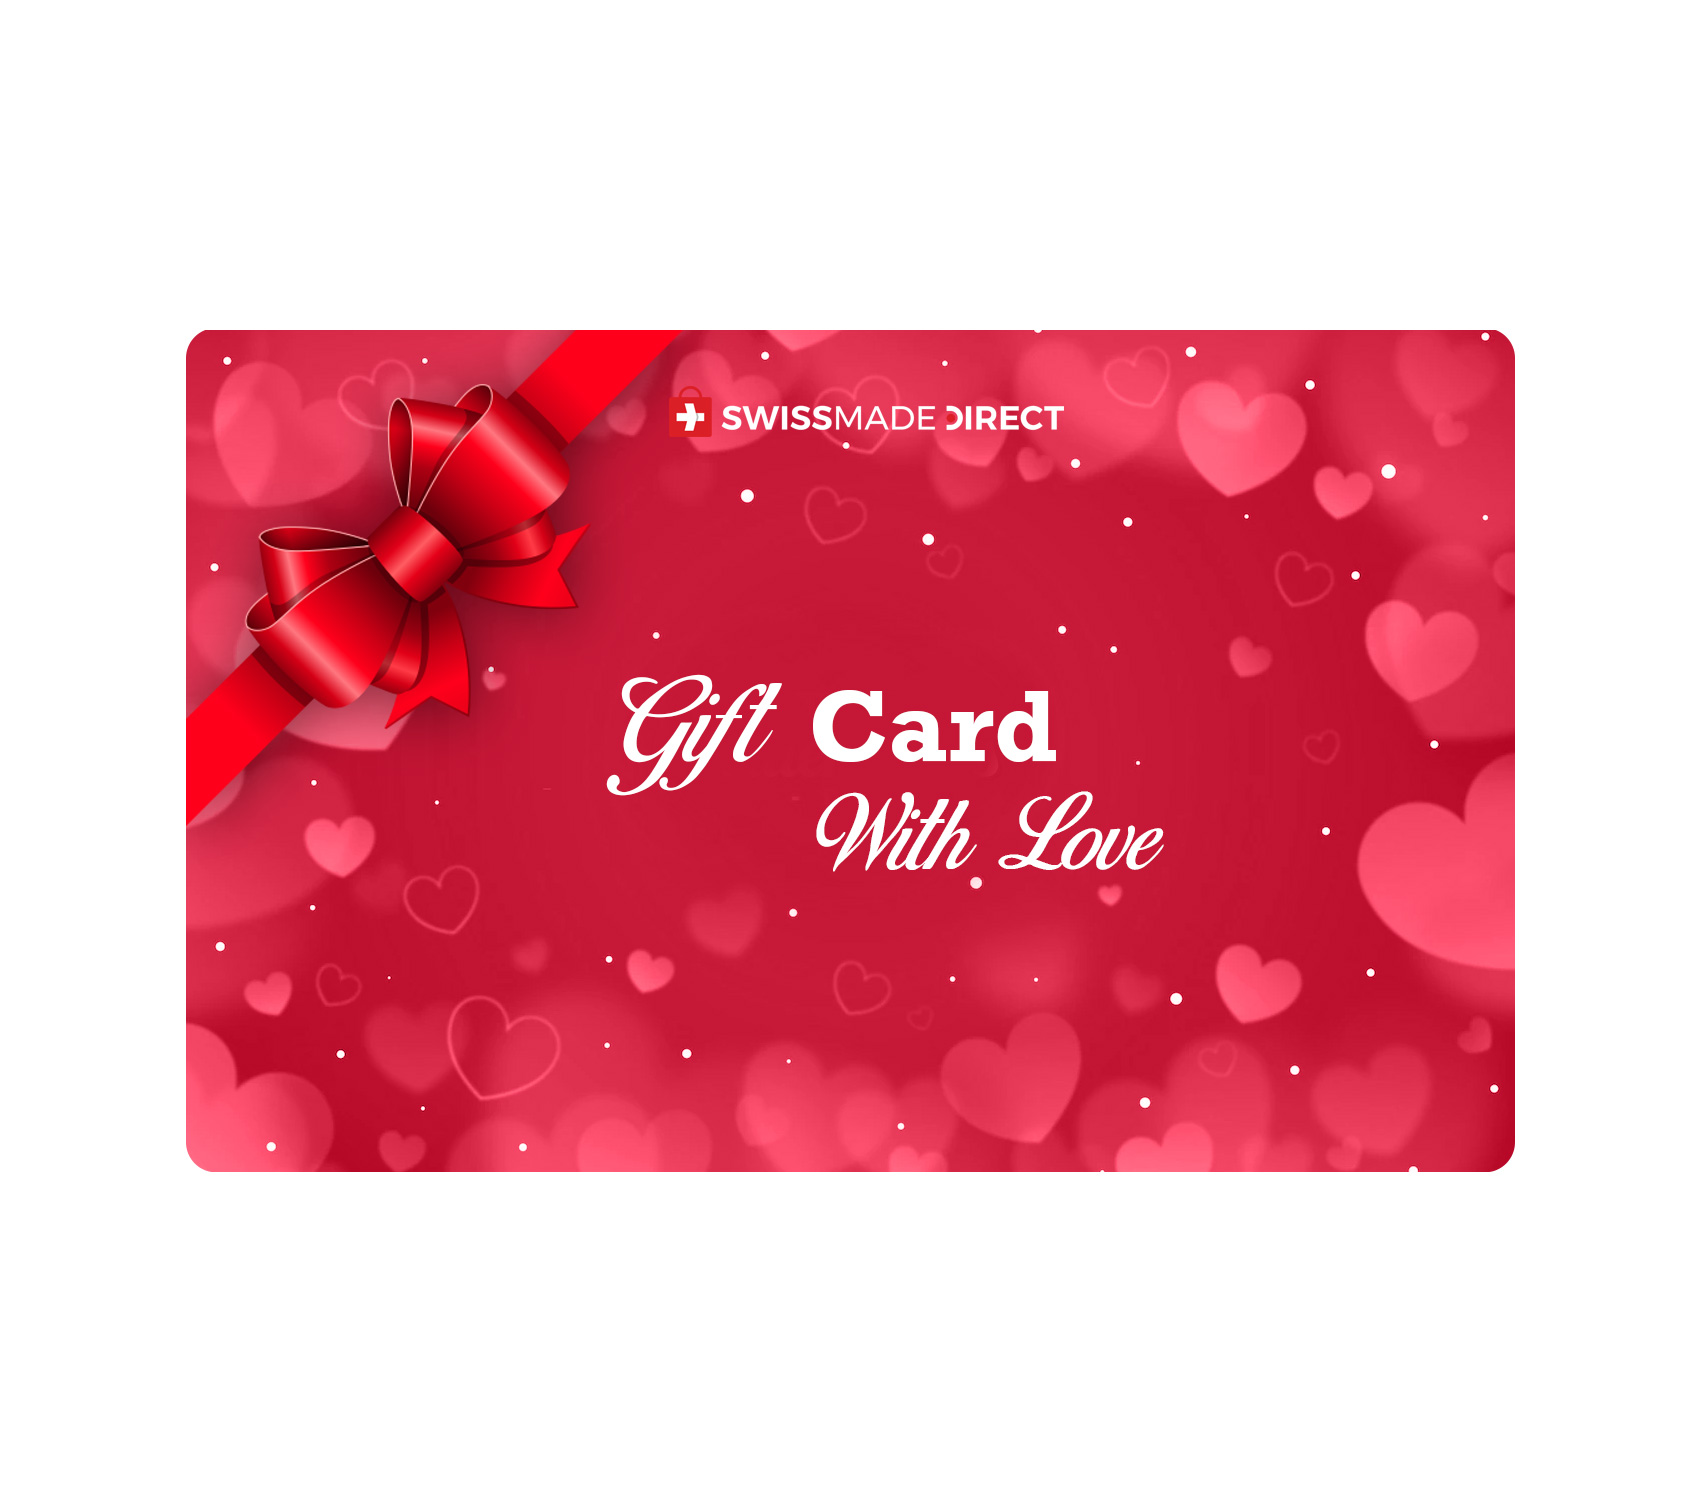 With love gift card